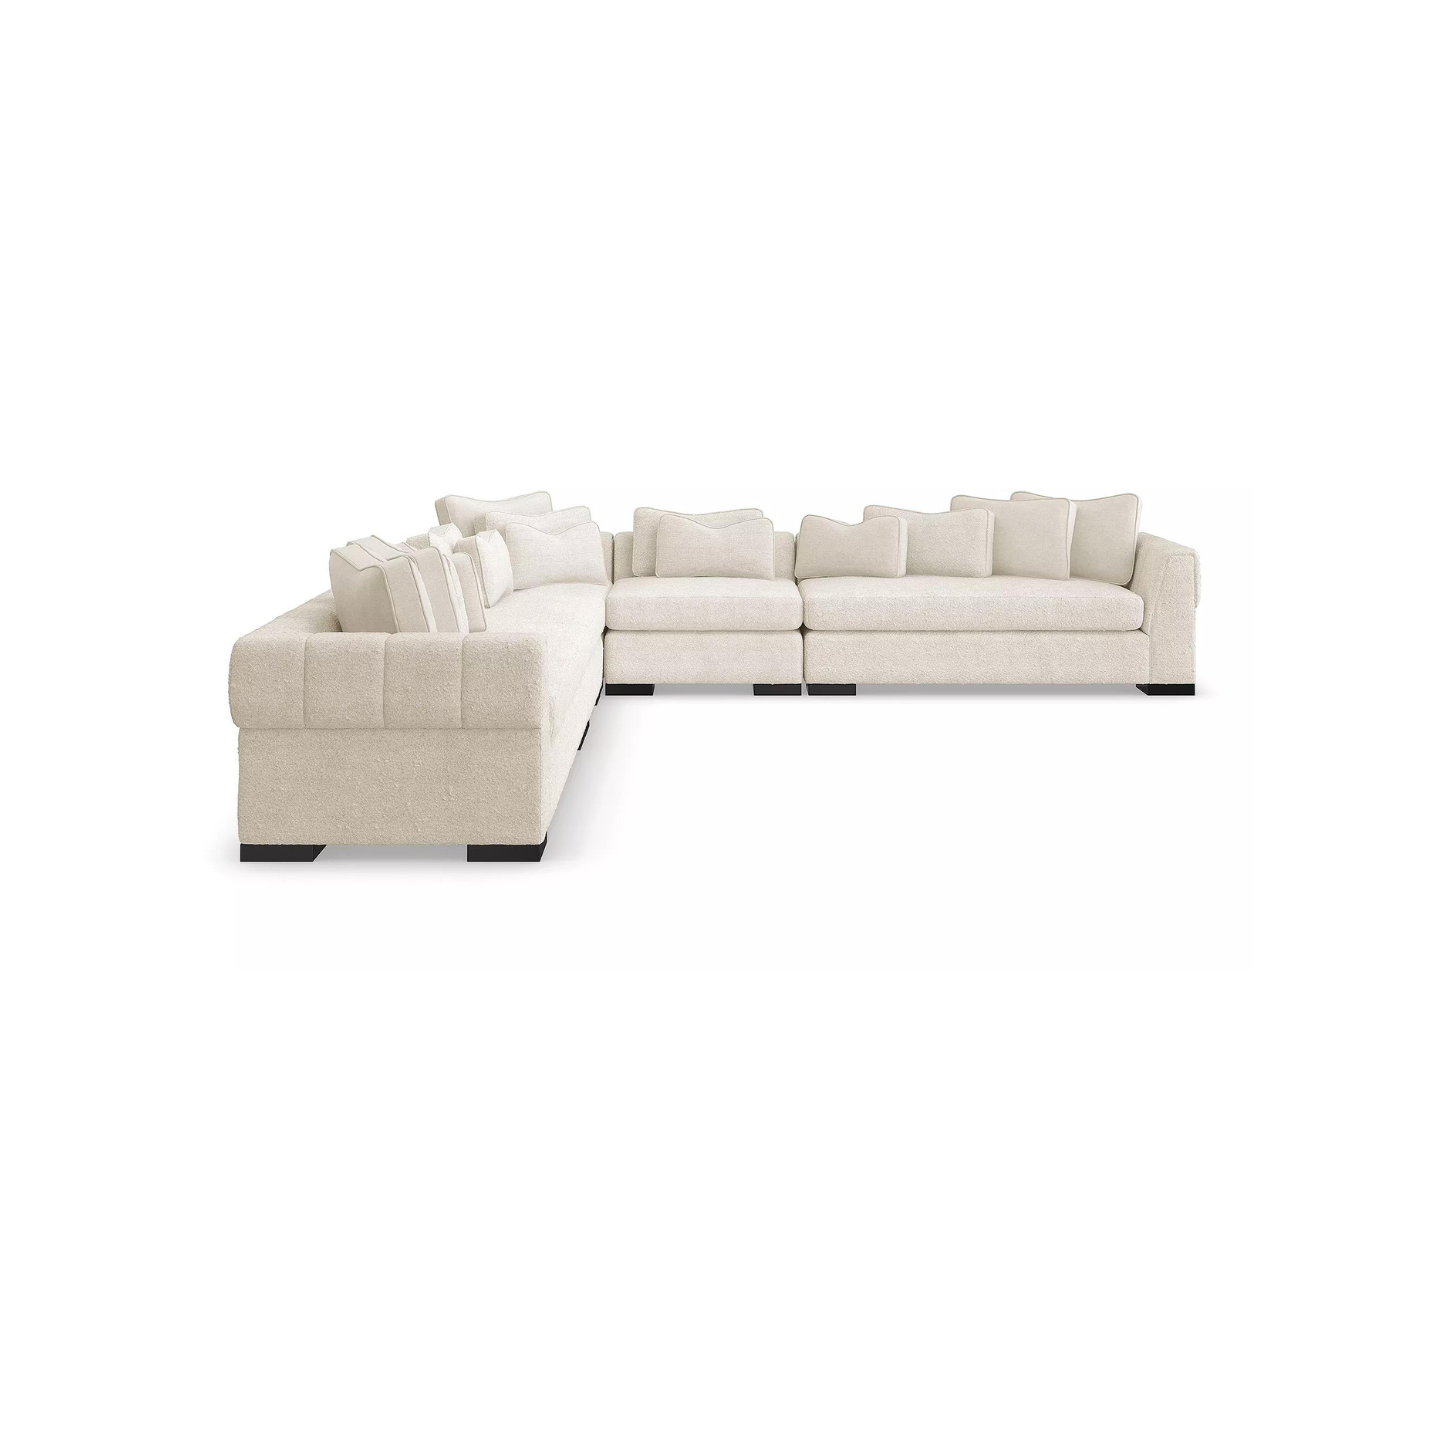 Up To 90% Off Couches And Ottomans